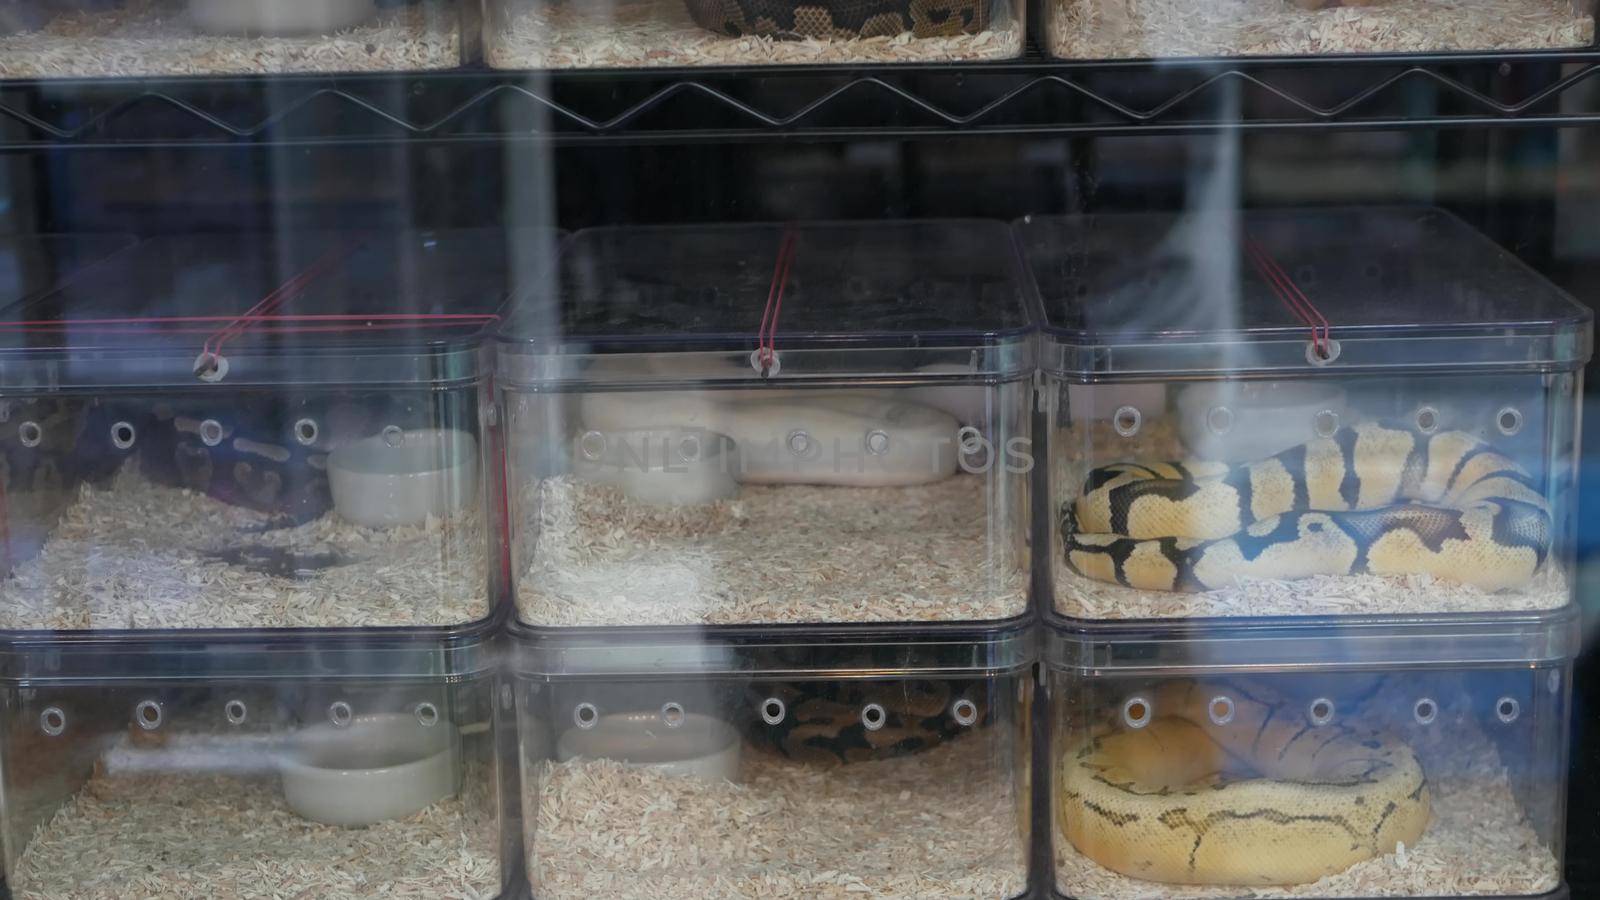 Captive bred snakes for sale. Small plastic boxes with captive bred ball pythons of various morphs placed on stall on Chatuchak Market in Bangkok, Thailand by DogoraSun